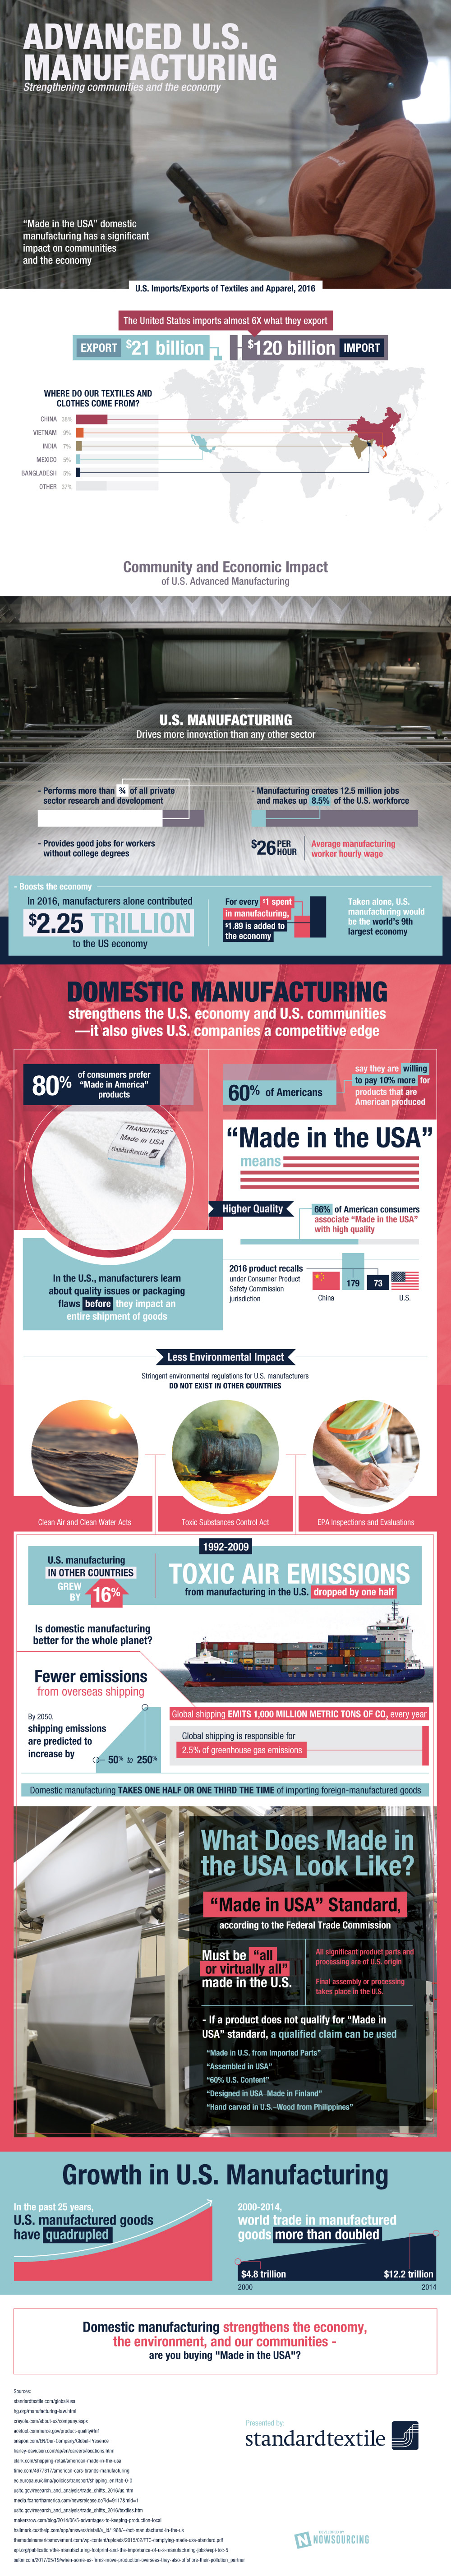 Why Strengthening the US Manufacturing Sector Make Economic and Environment Sense - Infographic